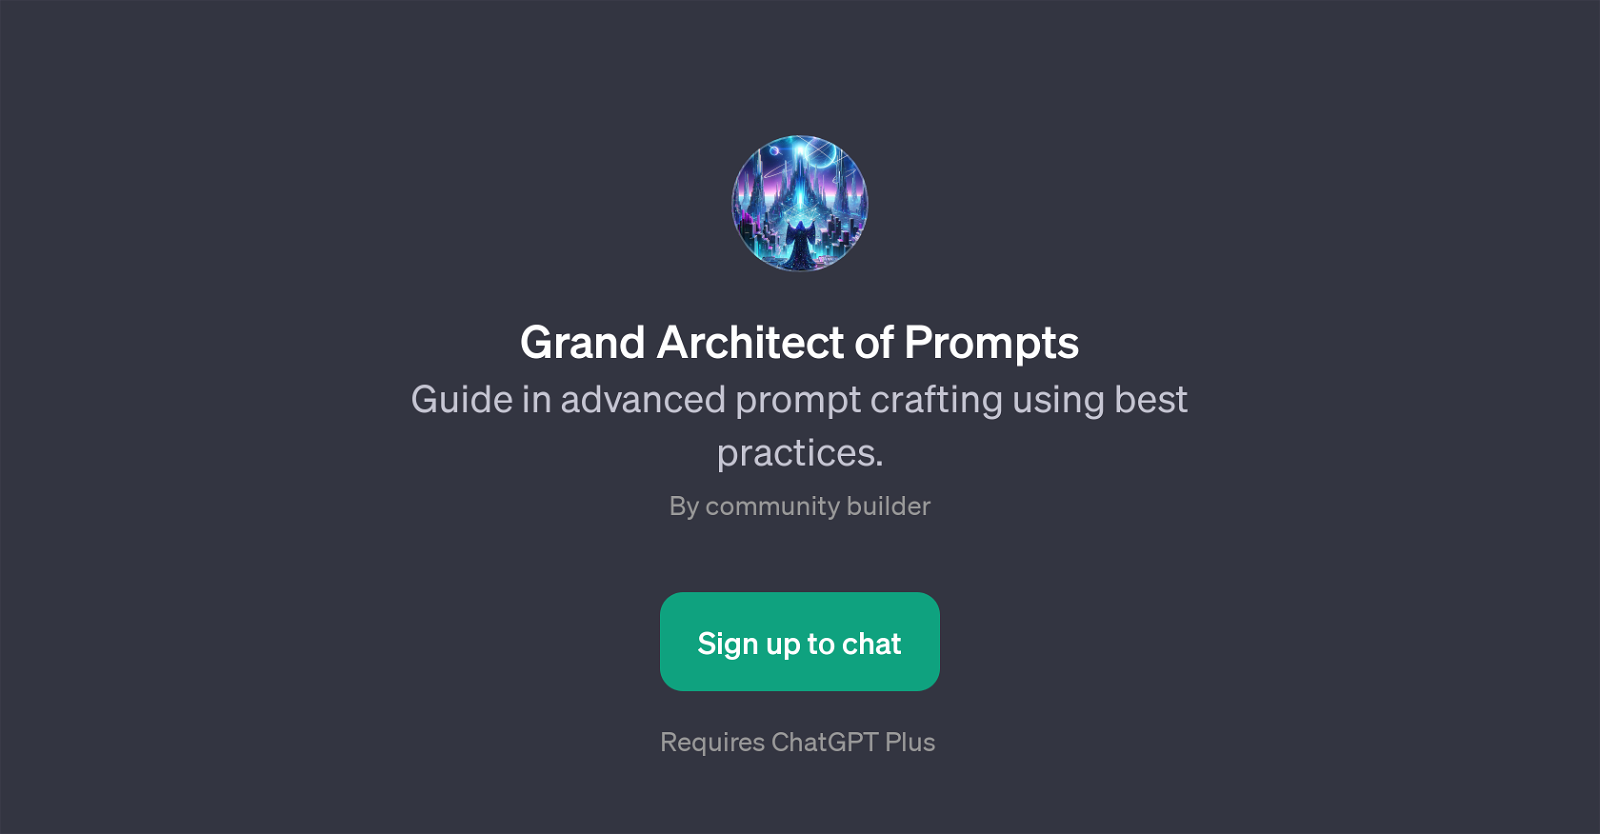 Grand Architect of Prompts website